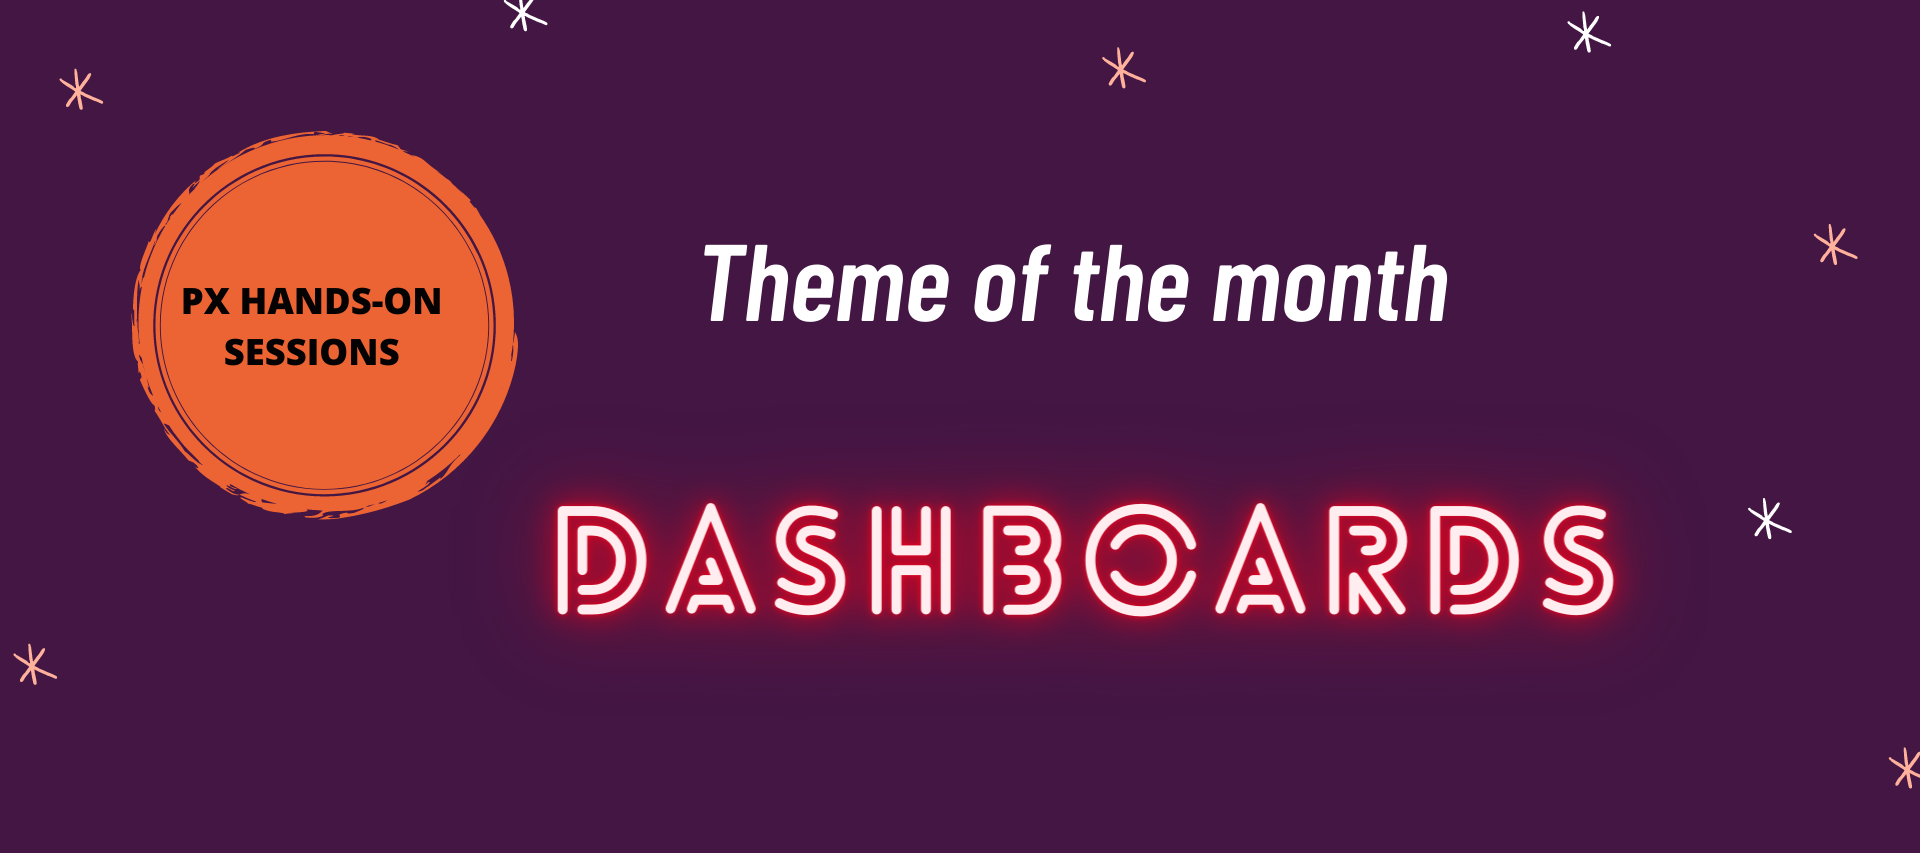 PX - Theme of the month - "DASHBOARDS"